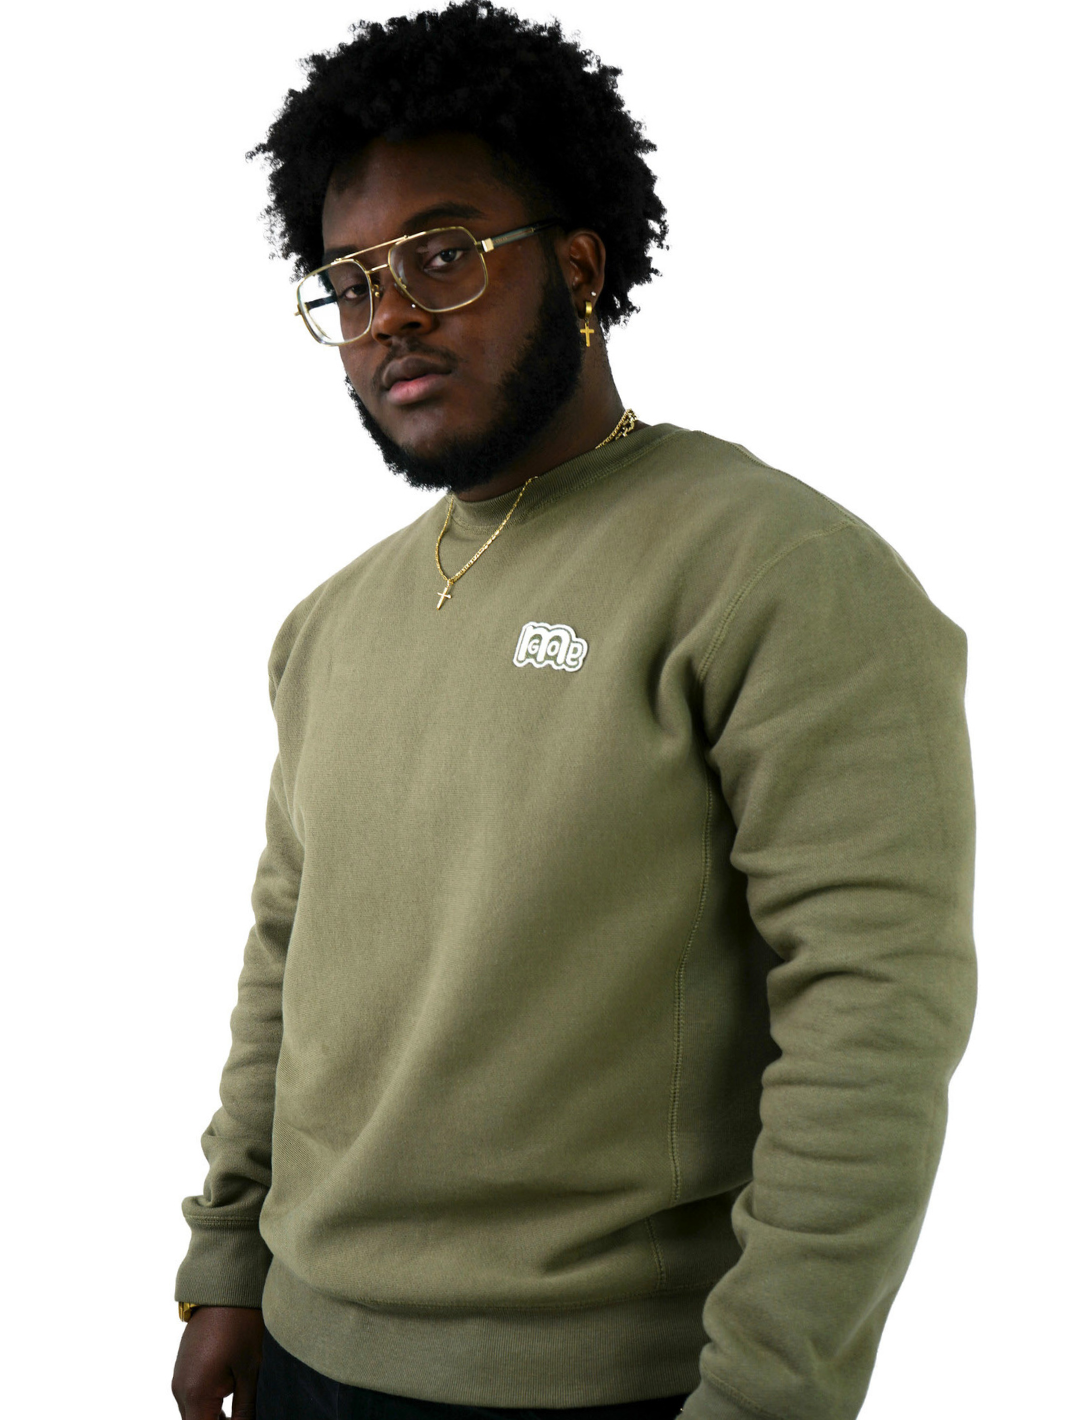 Luxury Olive Green Crewneck with premium cross grain design to ensure long-lasting comfort and wear. Featuring logo at left front and GODinme on the back.